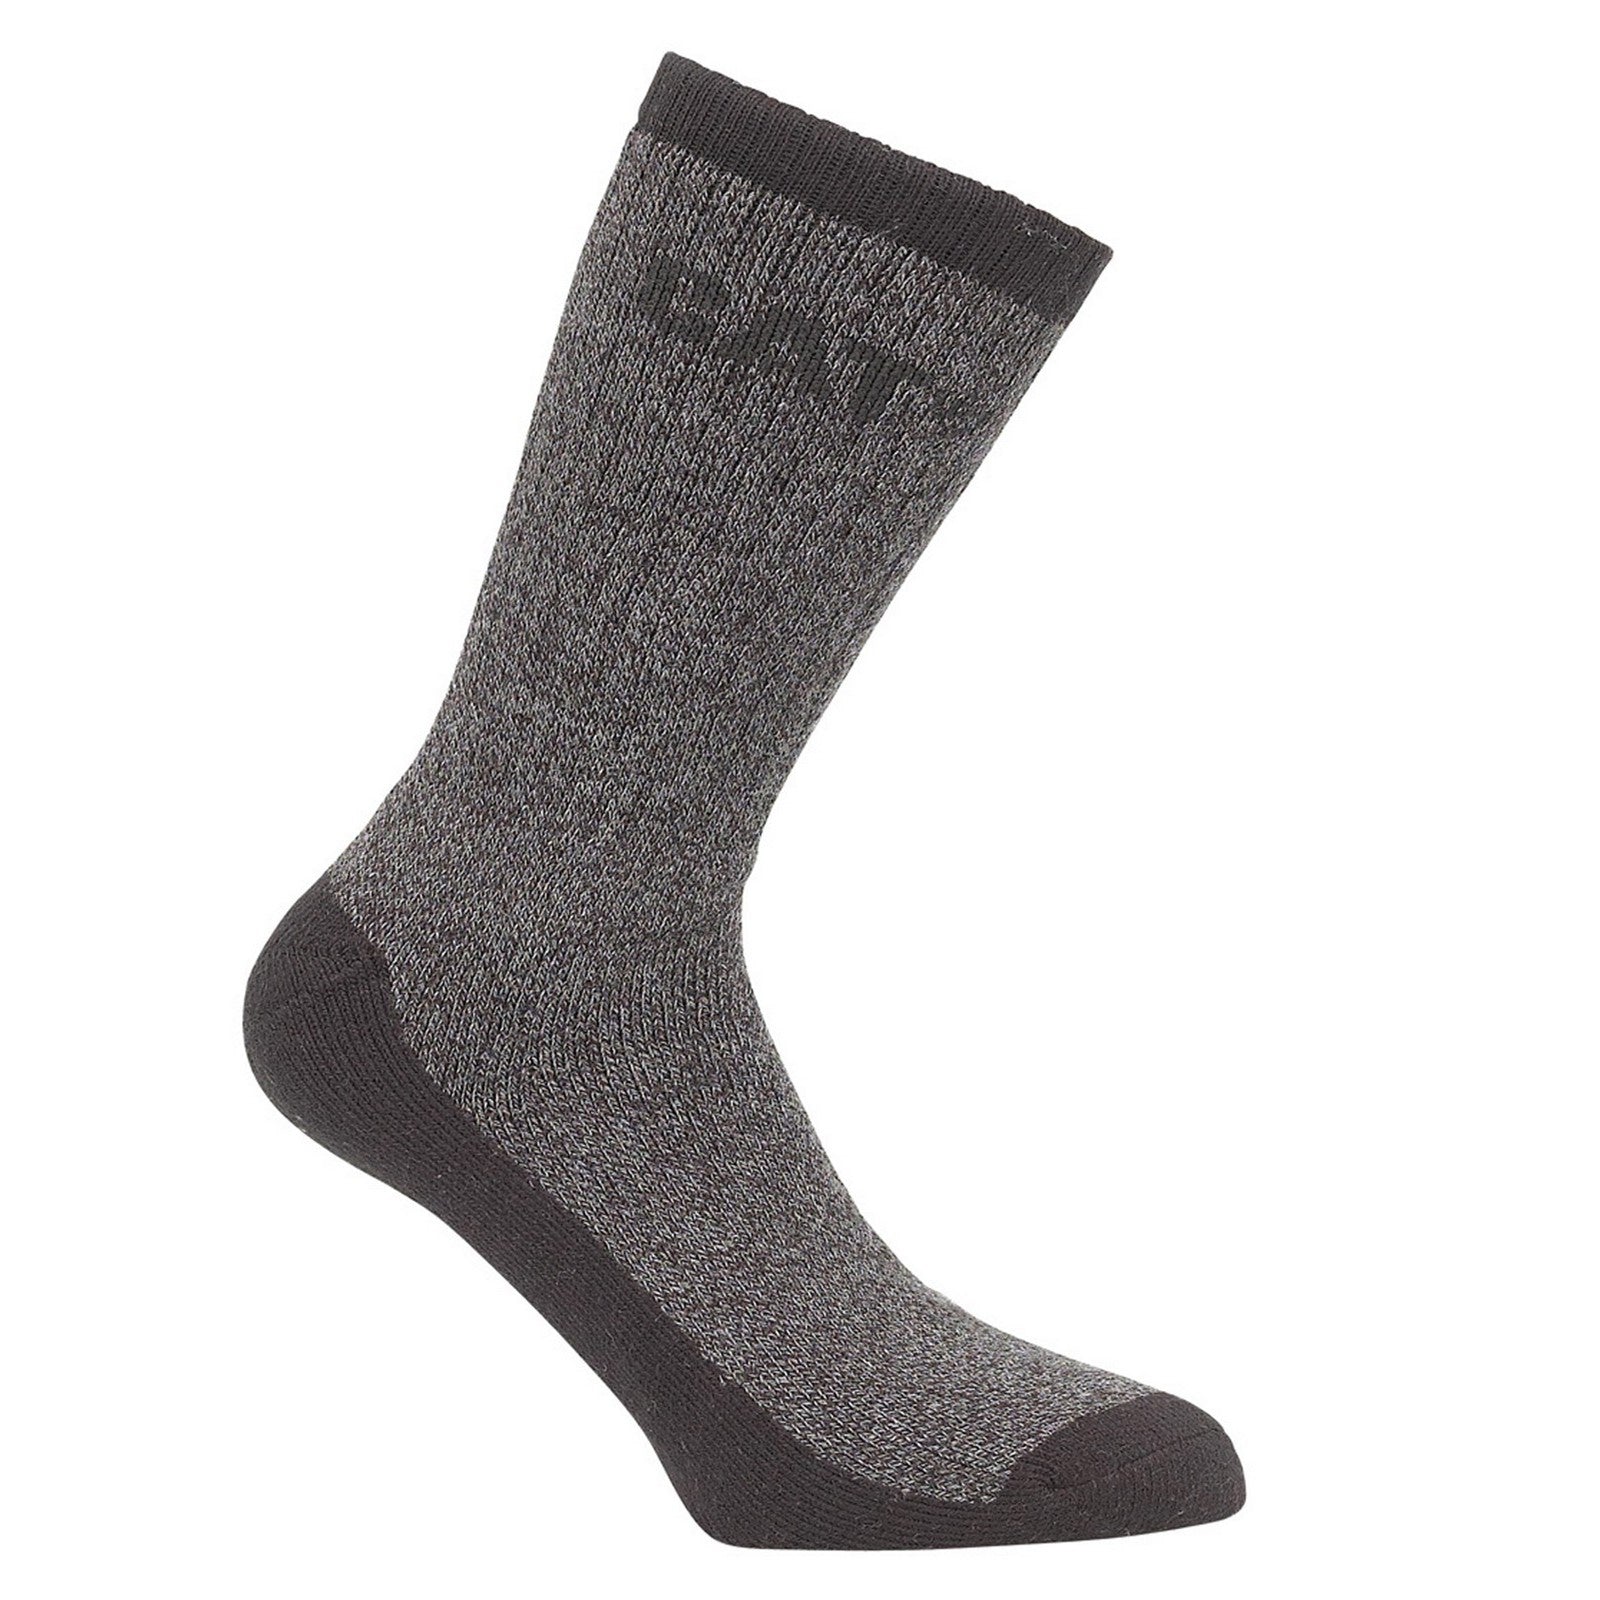 CAT Thermo Socks - 2 Pair Pack